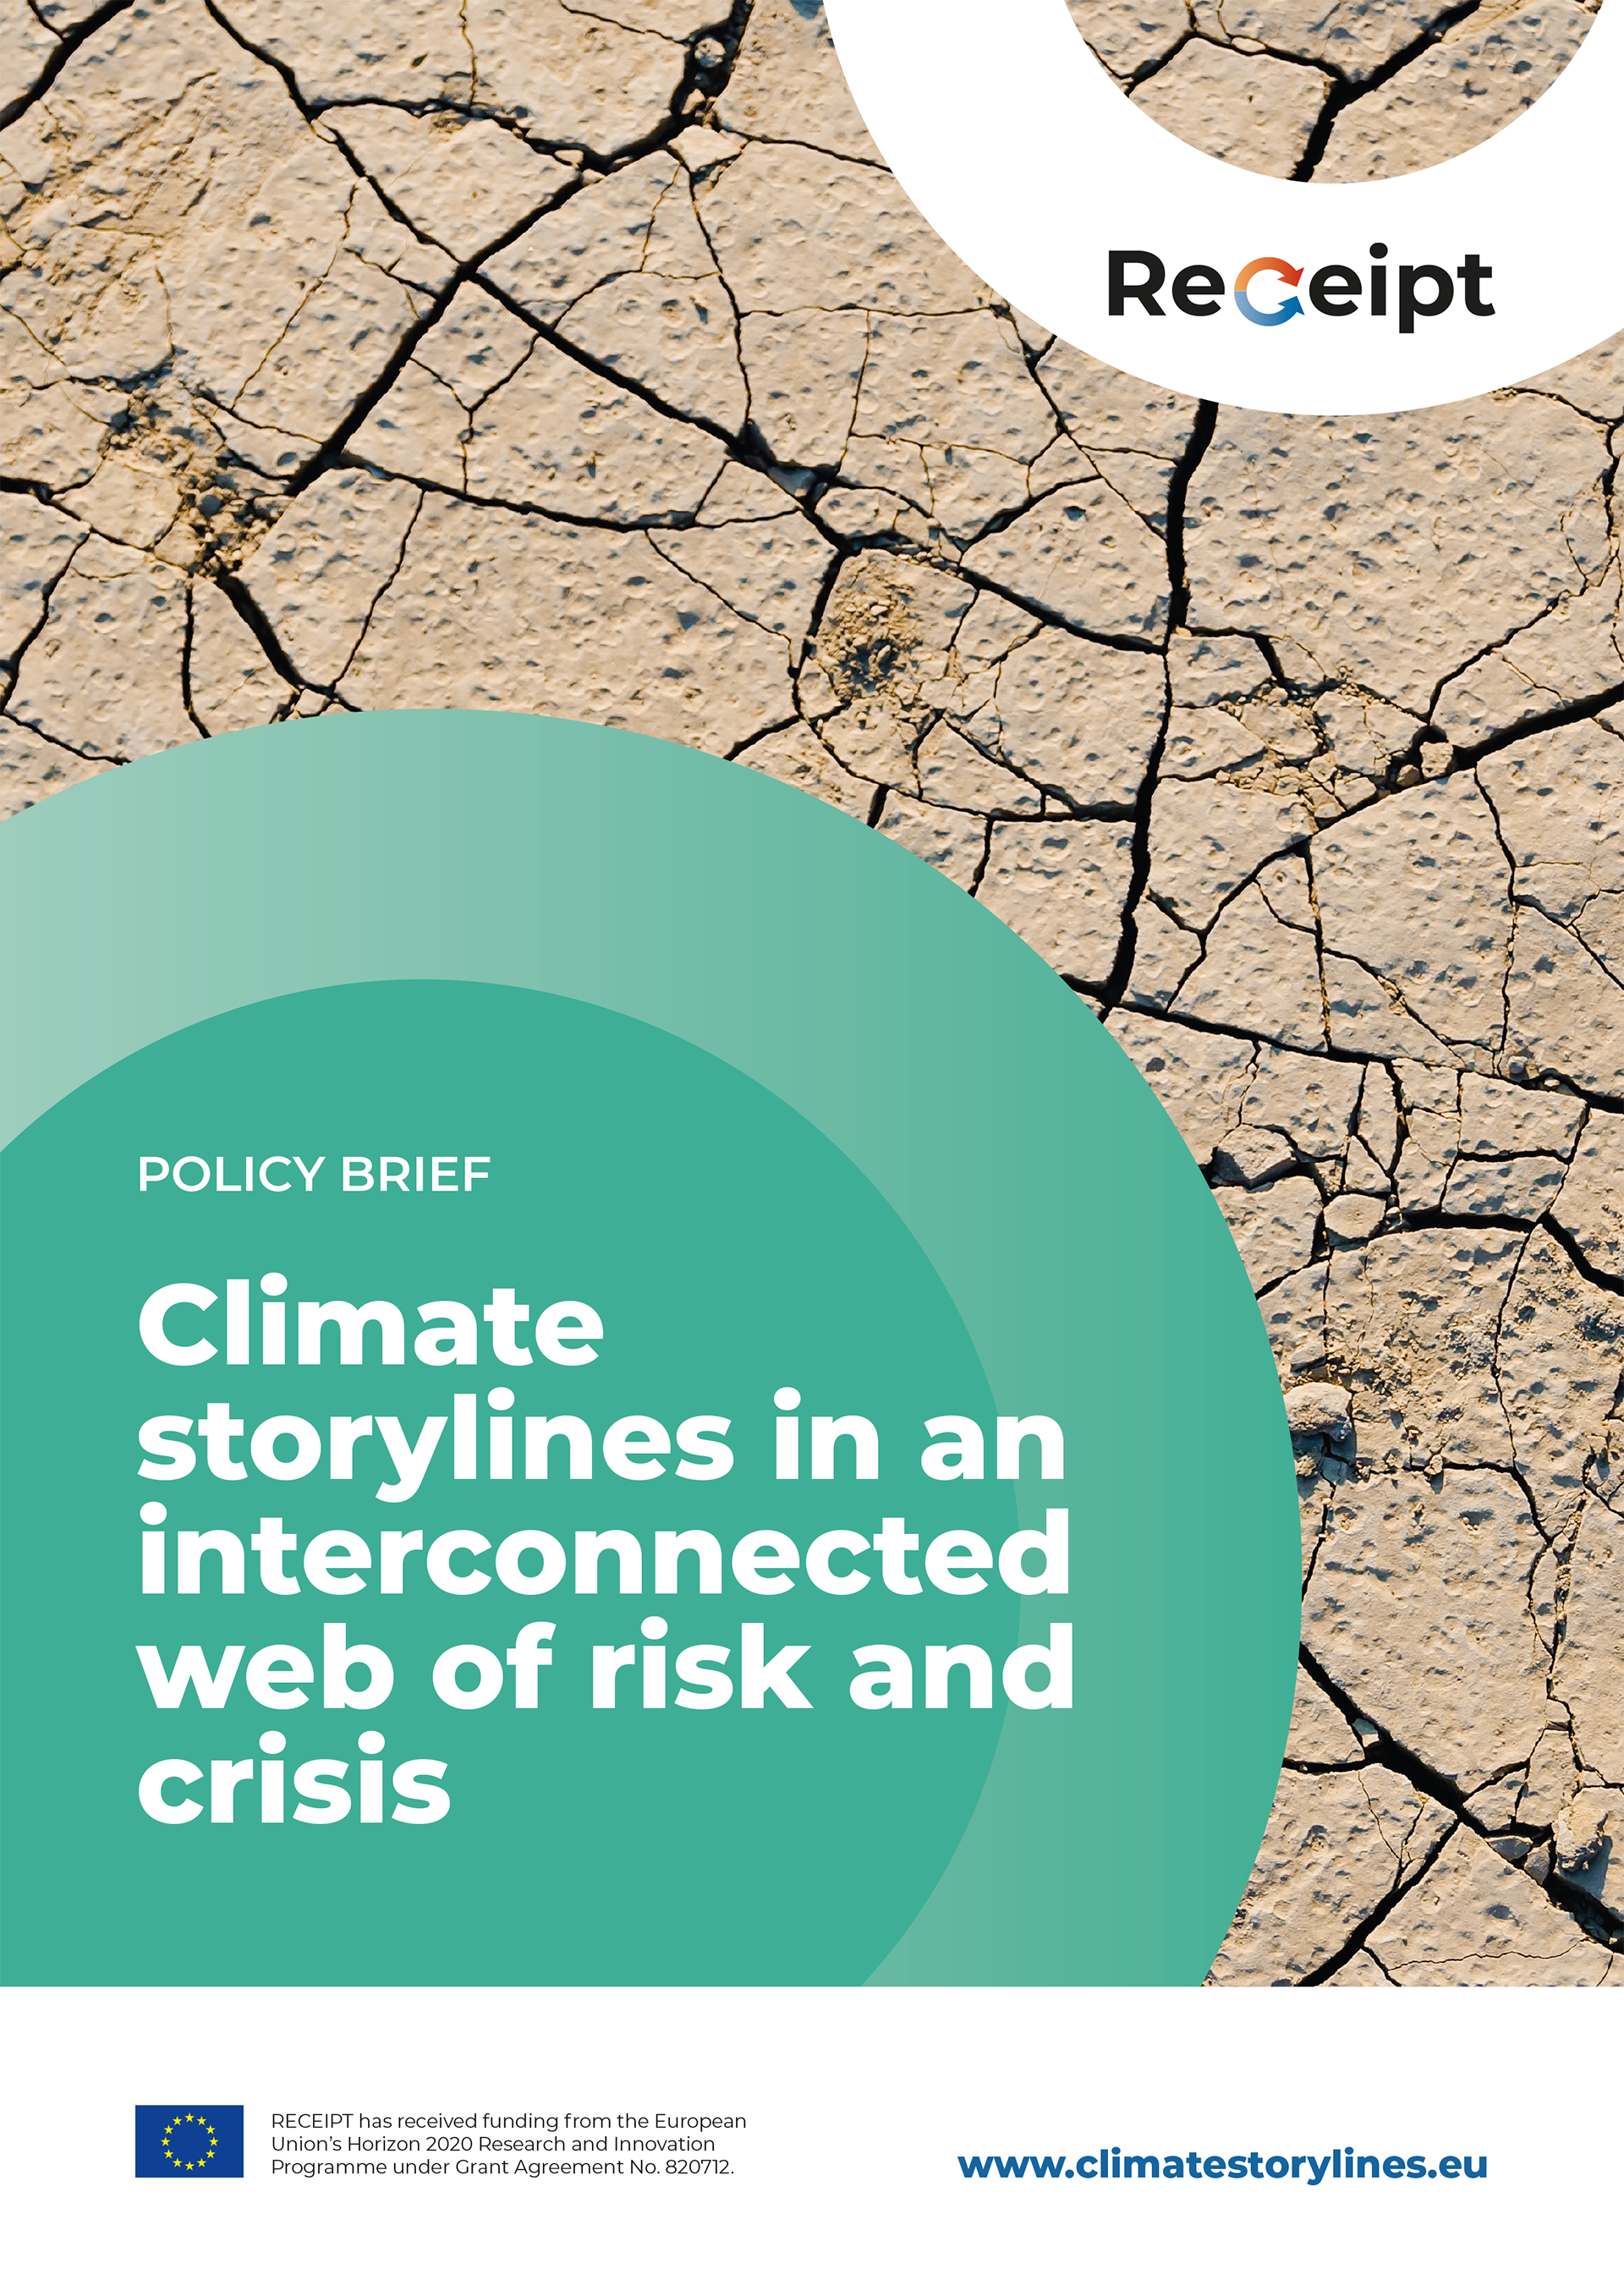 POLICY BRIEF Climate storylines in an interconnected web of risk and crisis